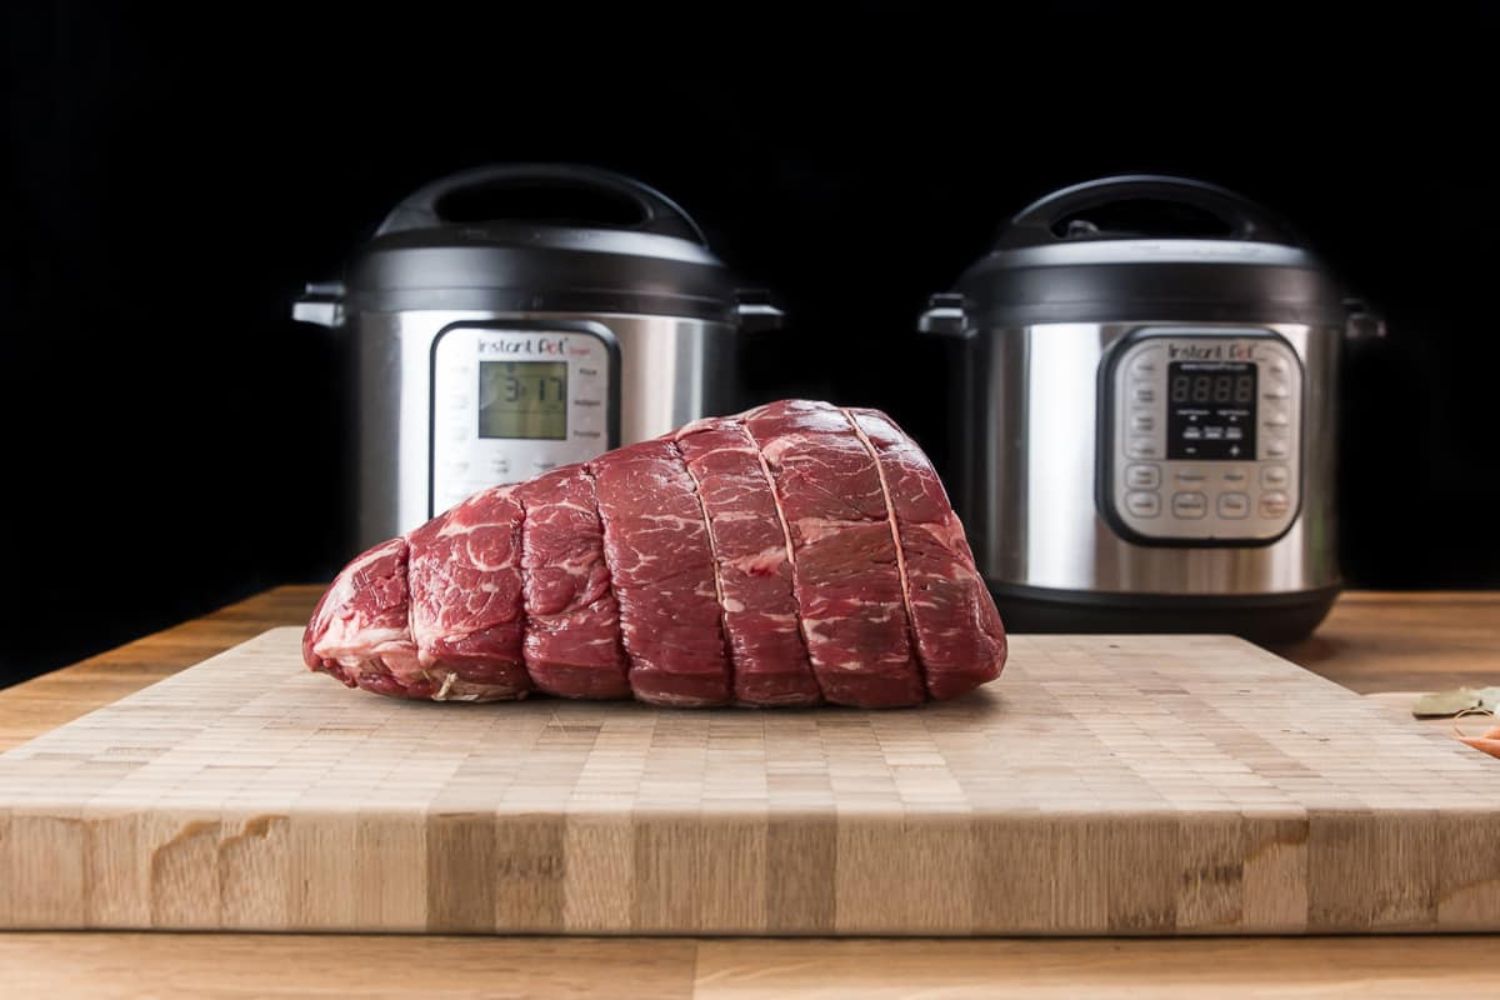 How To Tenderize Cubed Steak In An Electric Pressure Cooker